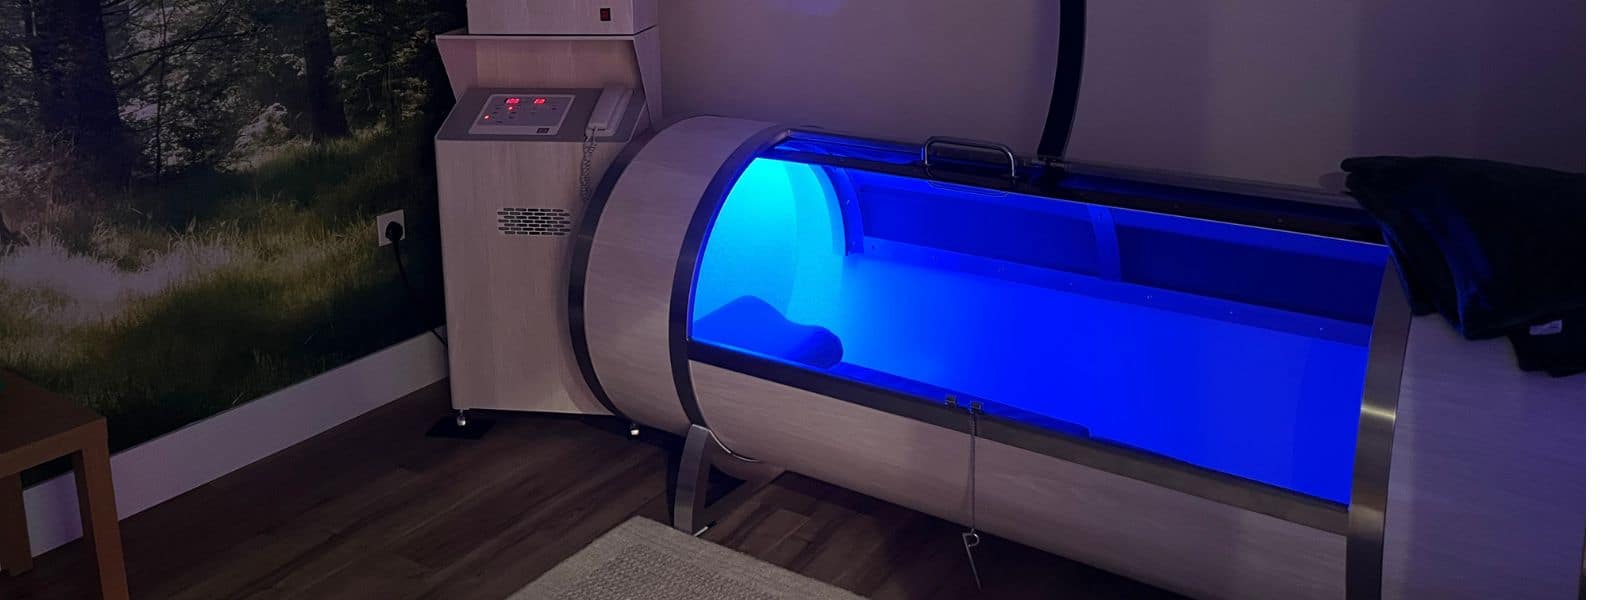 the airpod hyperbaric chamber, a long cylinder shape chamber with a glass lid lit up with blue lighting